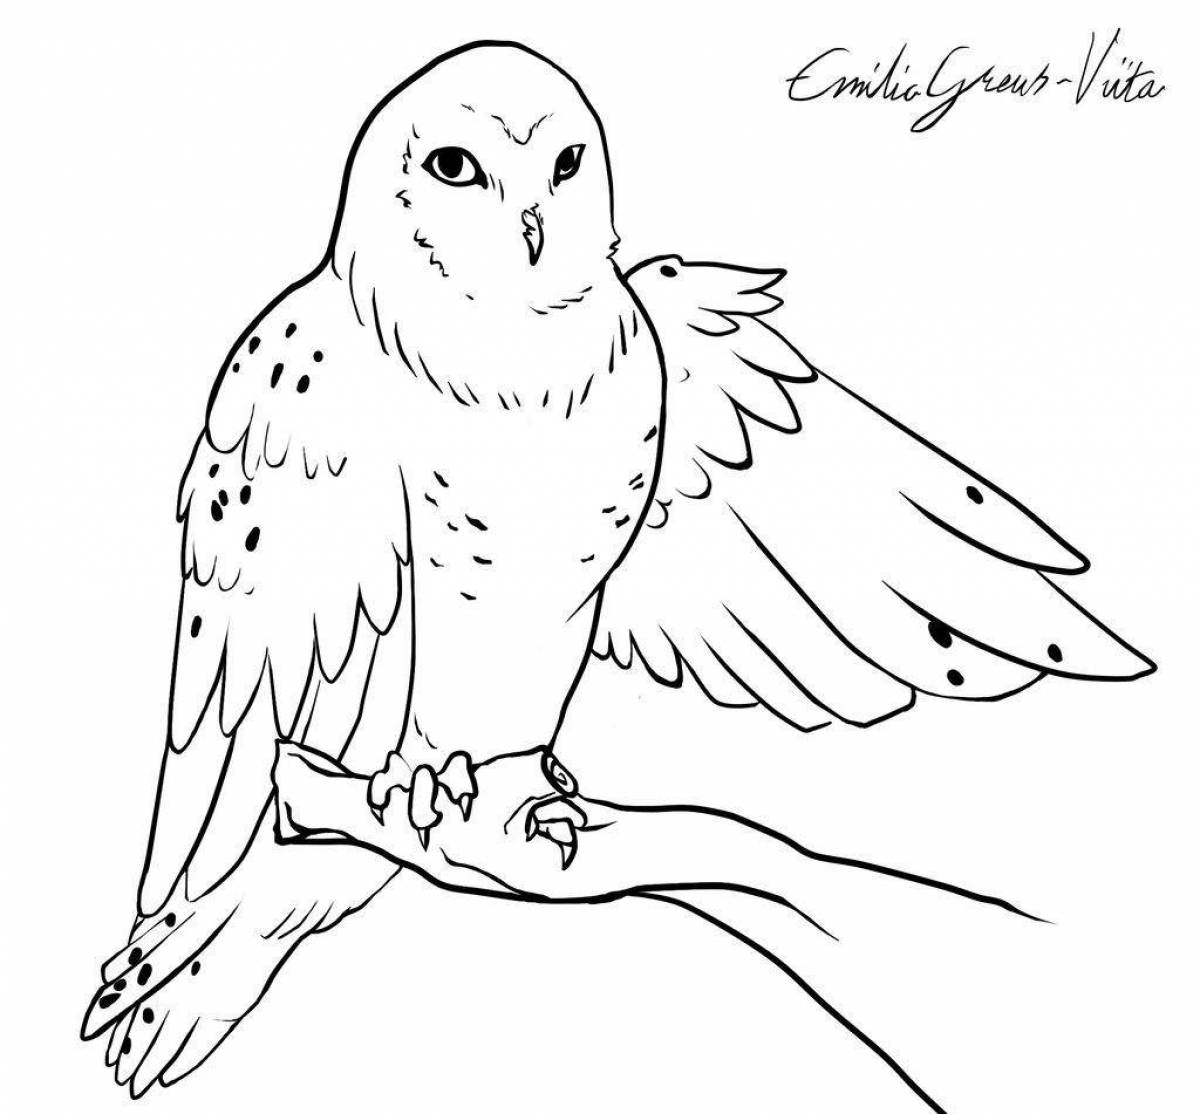 Coloring book gorgeous snowy owl